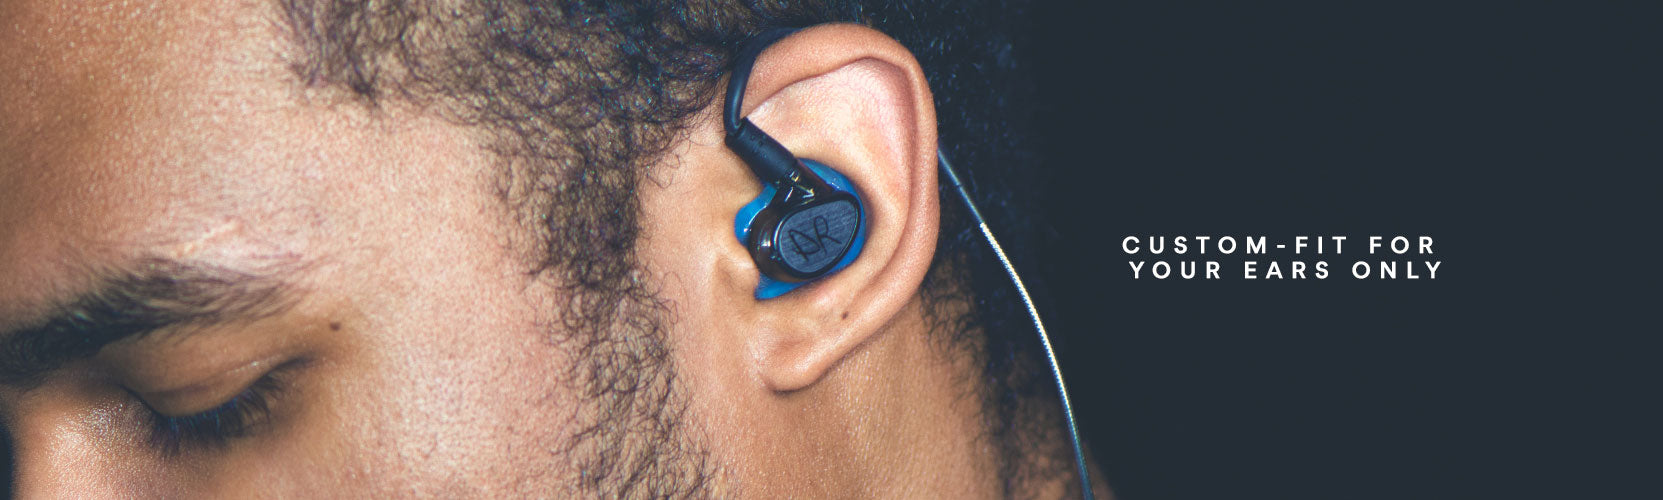 Close-up of a person's left ear wearing a custom-fit blue earbud, with text that reads "custom-fit for your ears only" on a grey background.